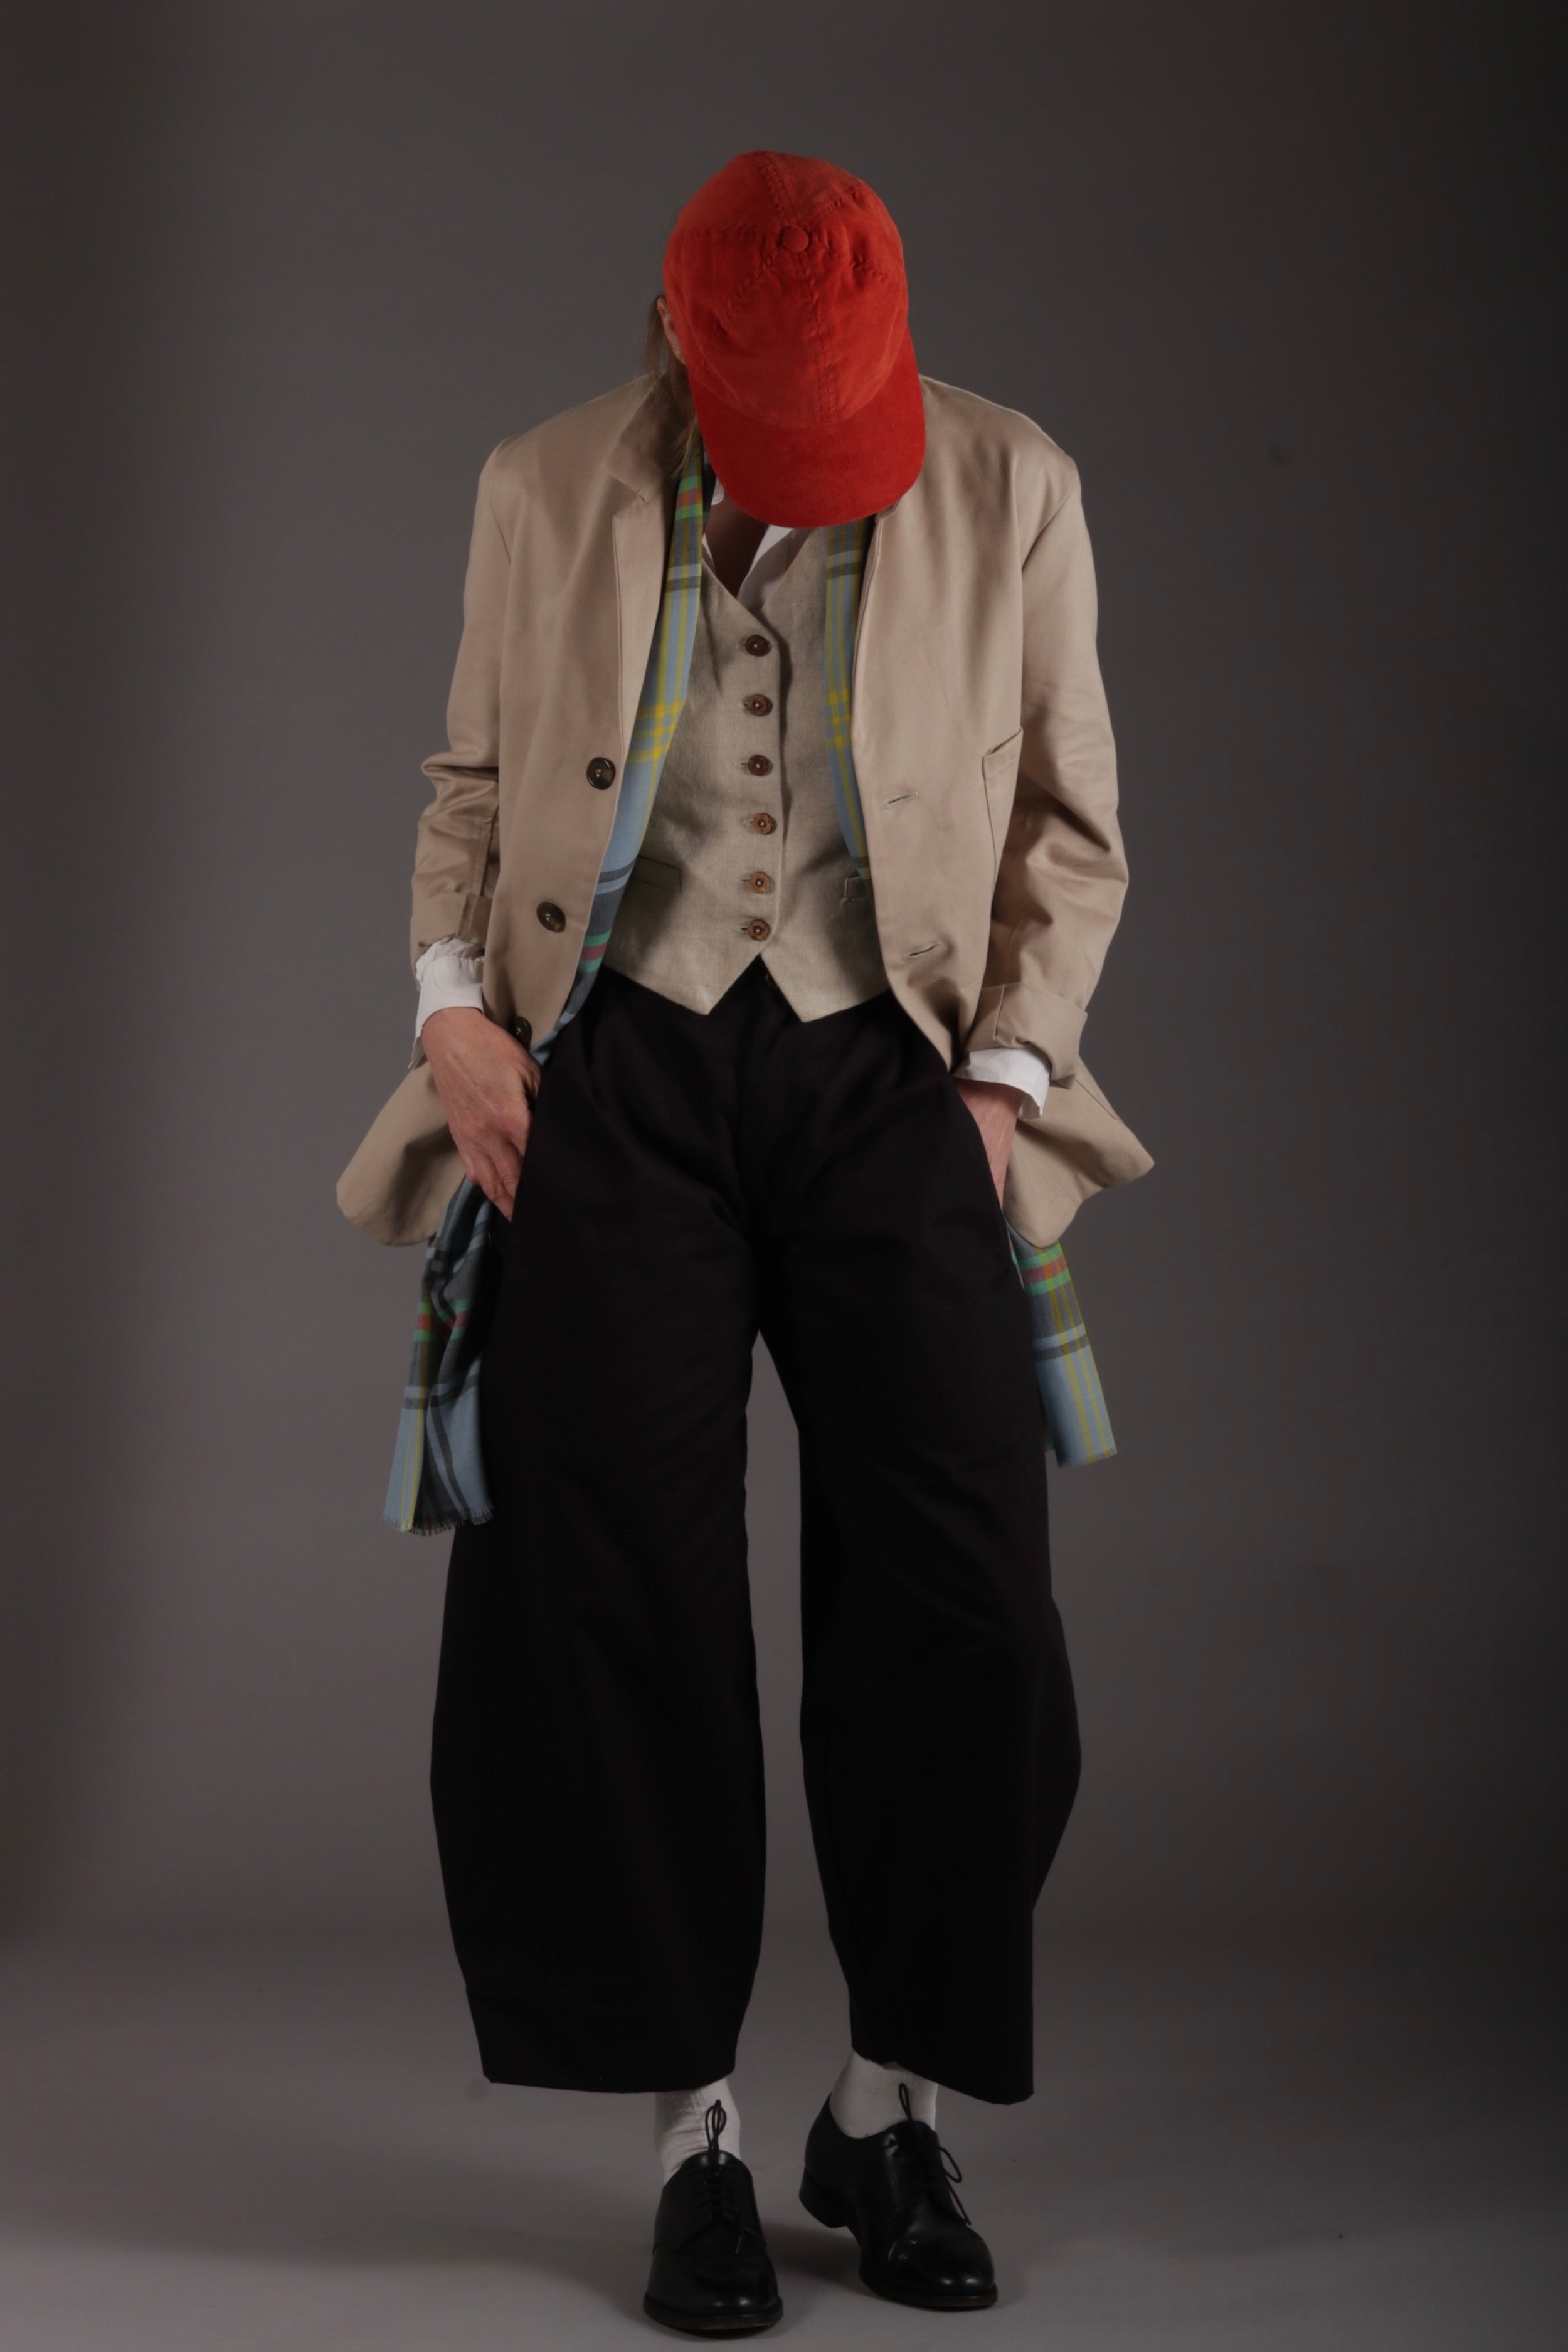 Sienna wears Carrier Company Dutch Trousers in Black Cotton Drill with Lightweight Collarless Shirt, Linene Waistcoat, Merino Scarf and Corduroy Baseball Cap